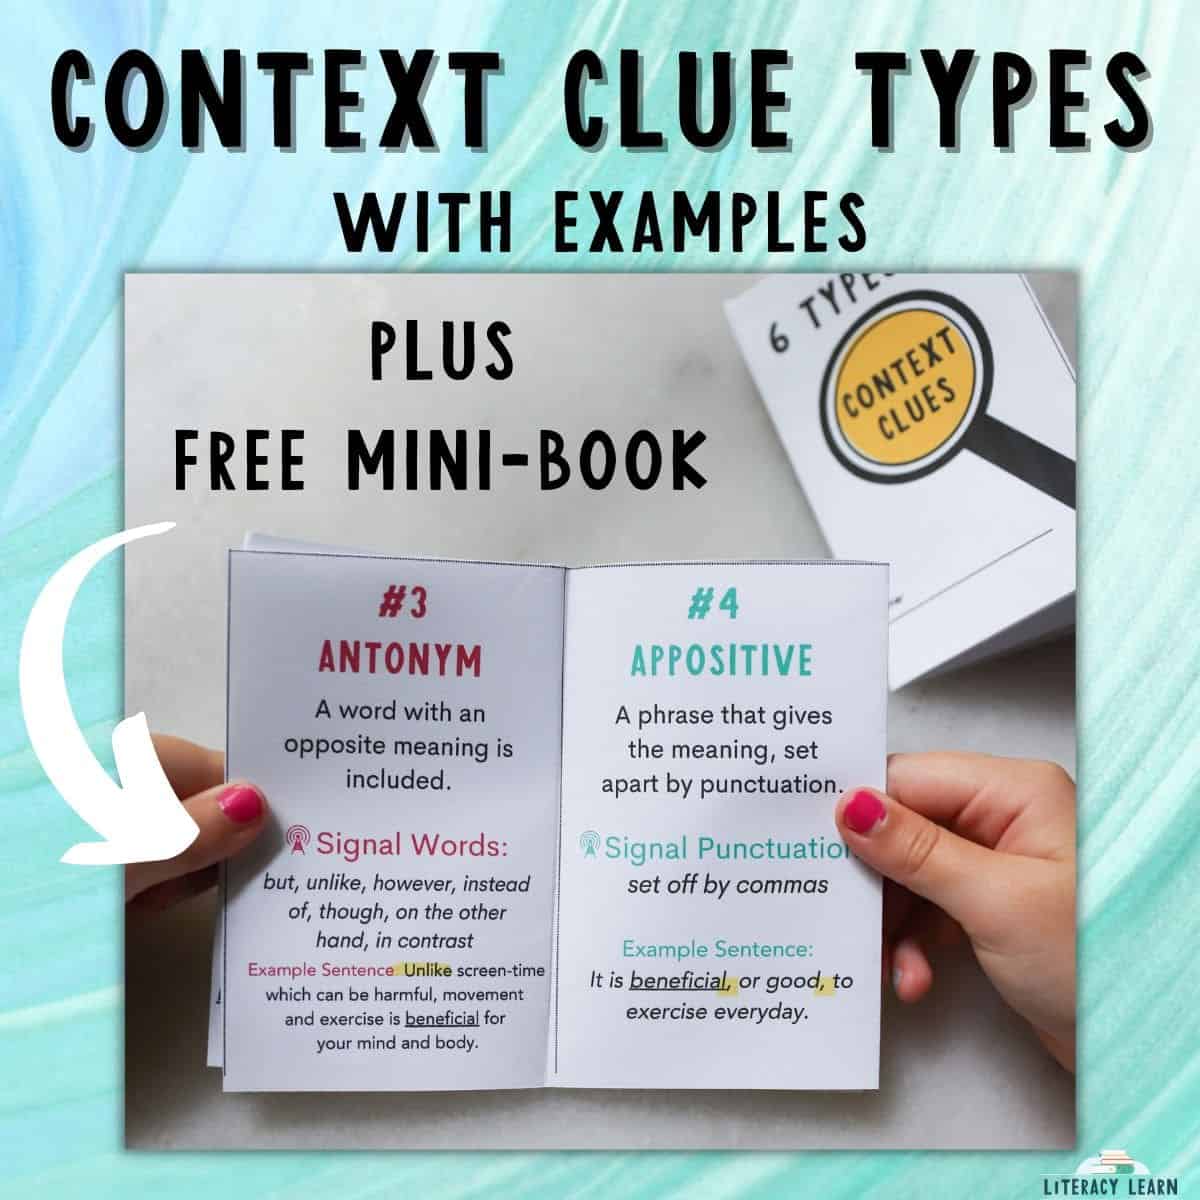 Blue background with photo of context clue minibook and words "Context Clue Types with Examples"